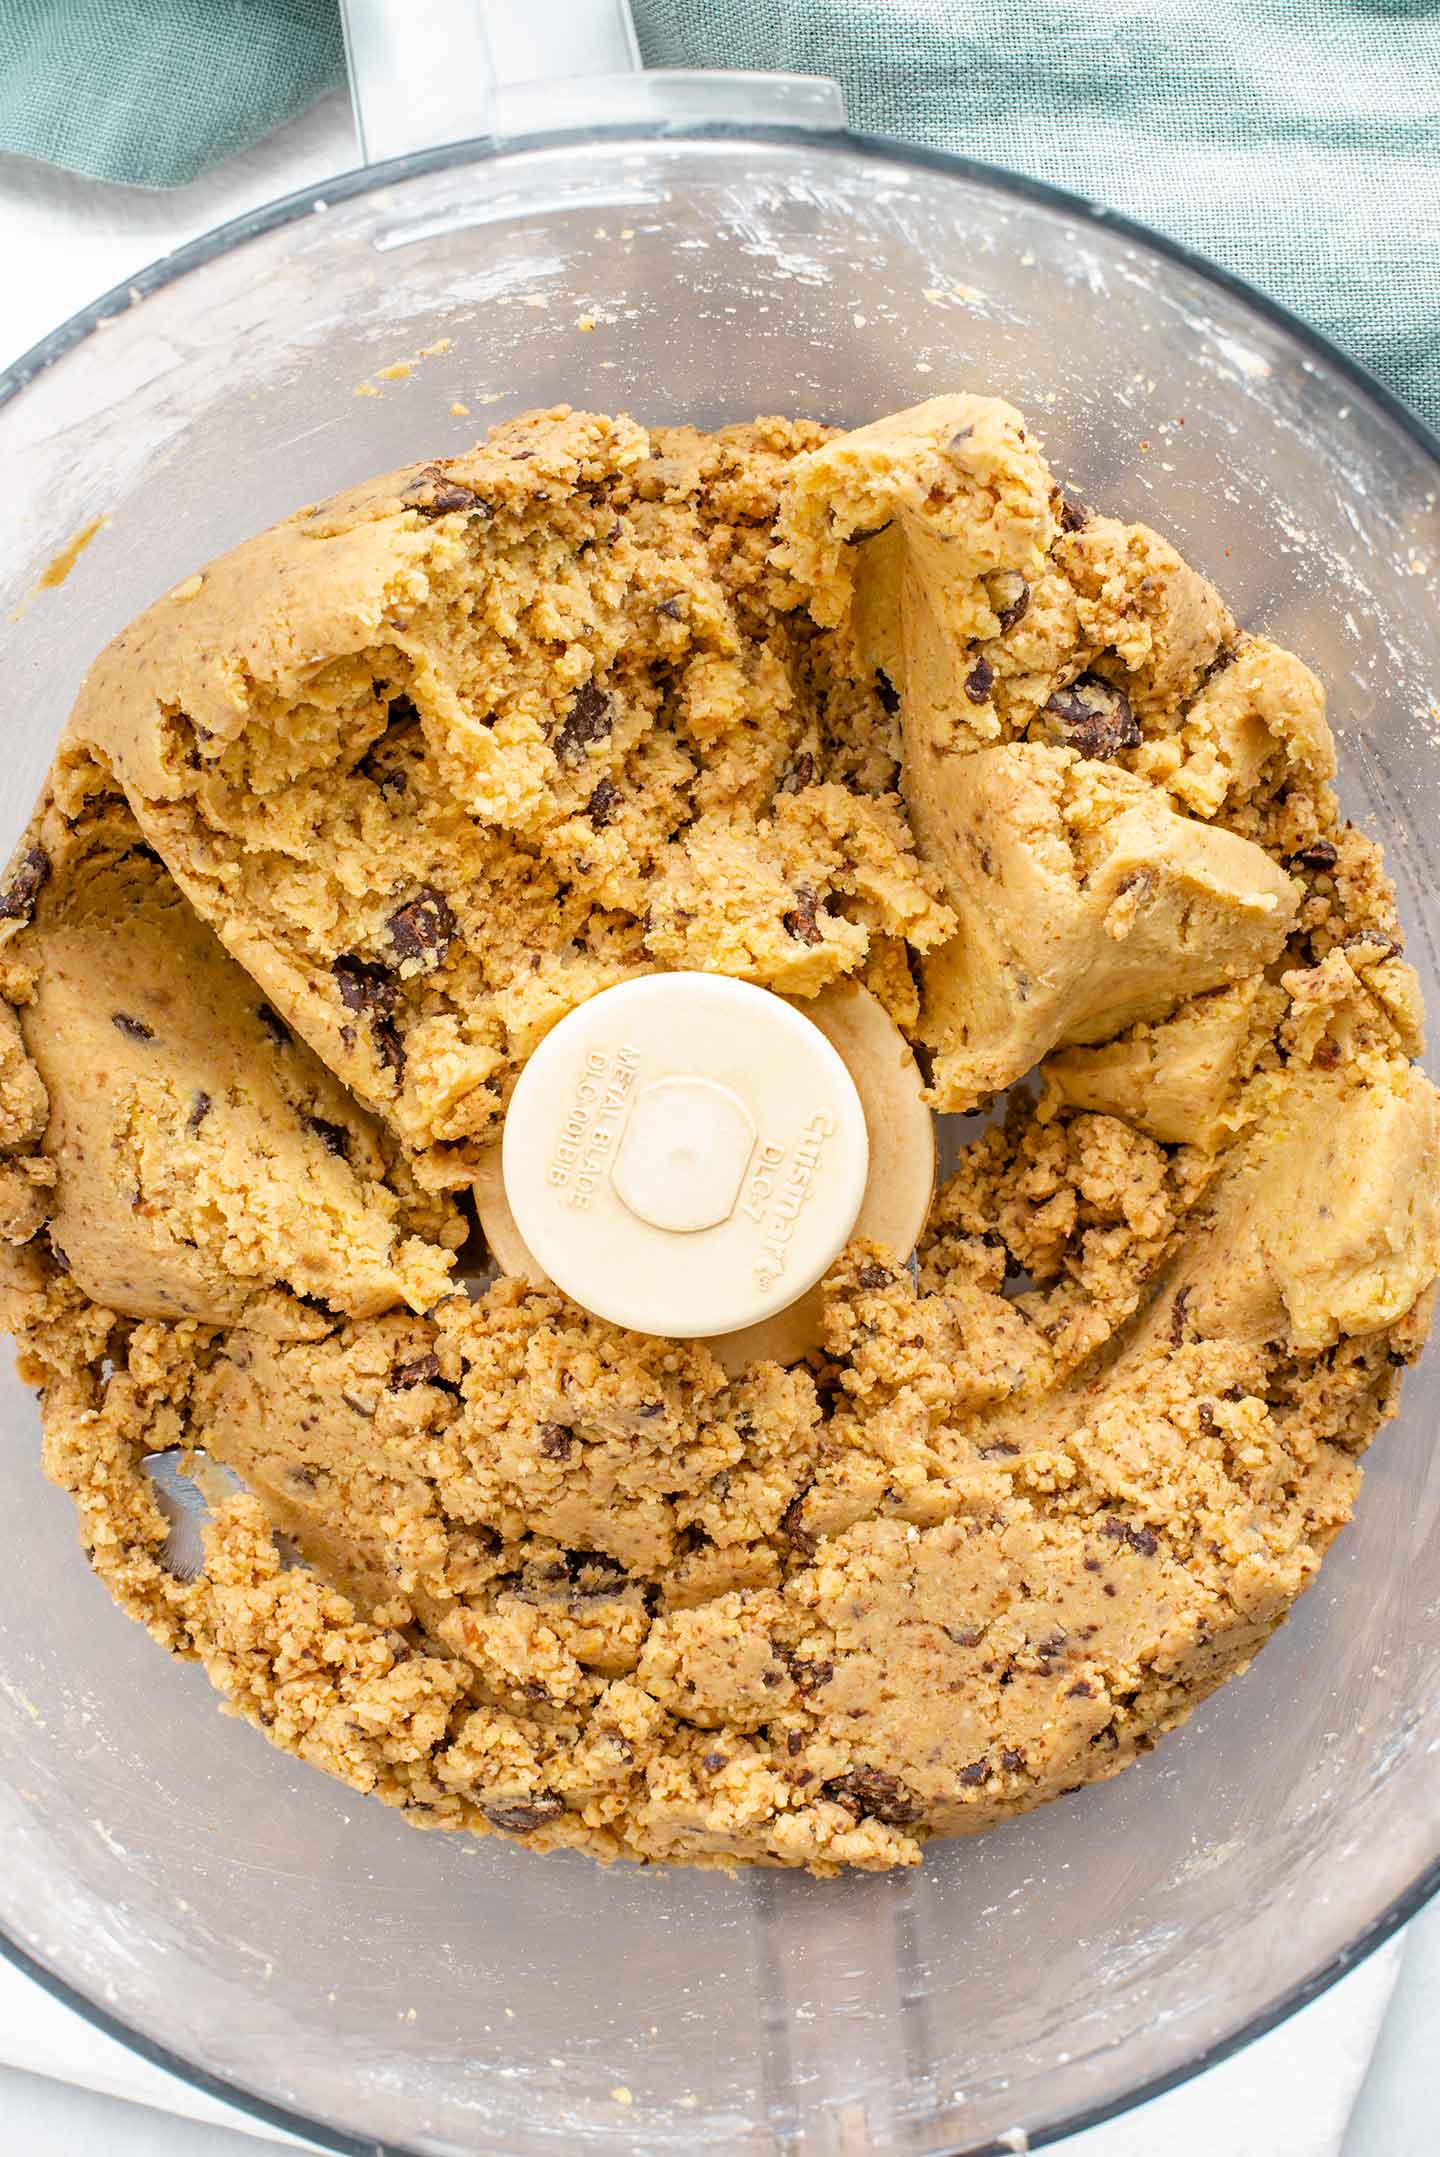 Top down view of the finished dough in a food processor. The dough is firm in texture and speckled with chocolate chips.